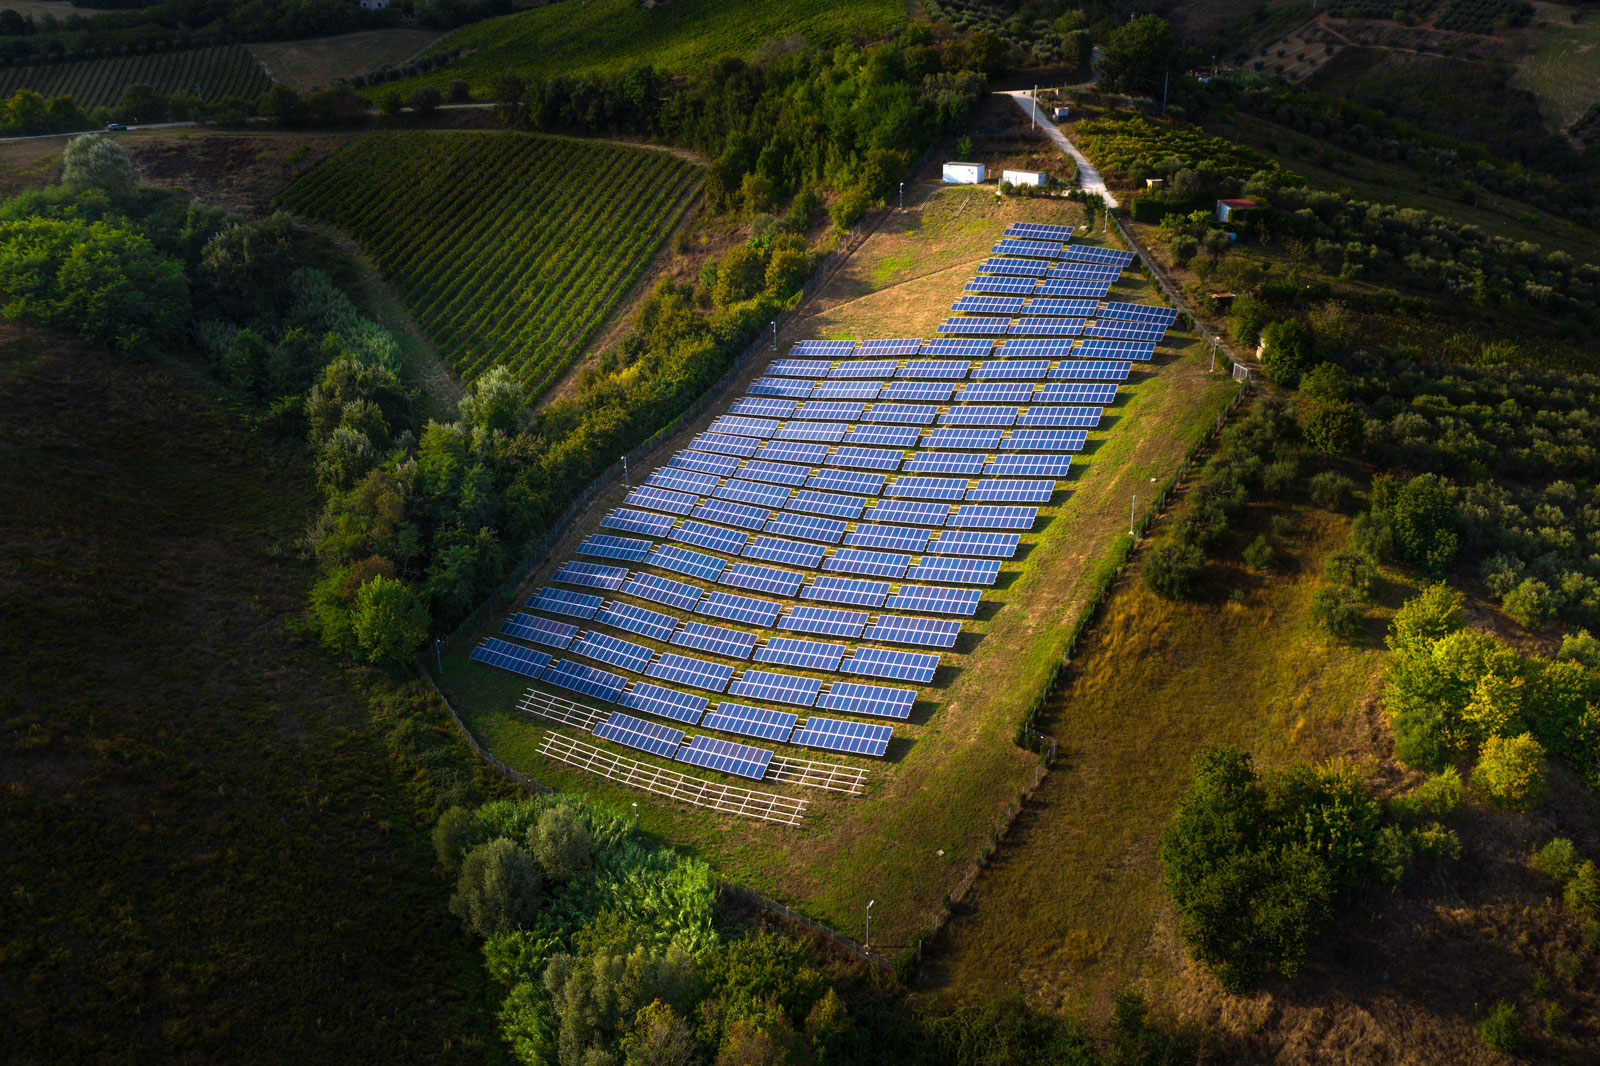 Michelmores advises Thrive Renewables on launch of Triodos crowdfunding offer